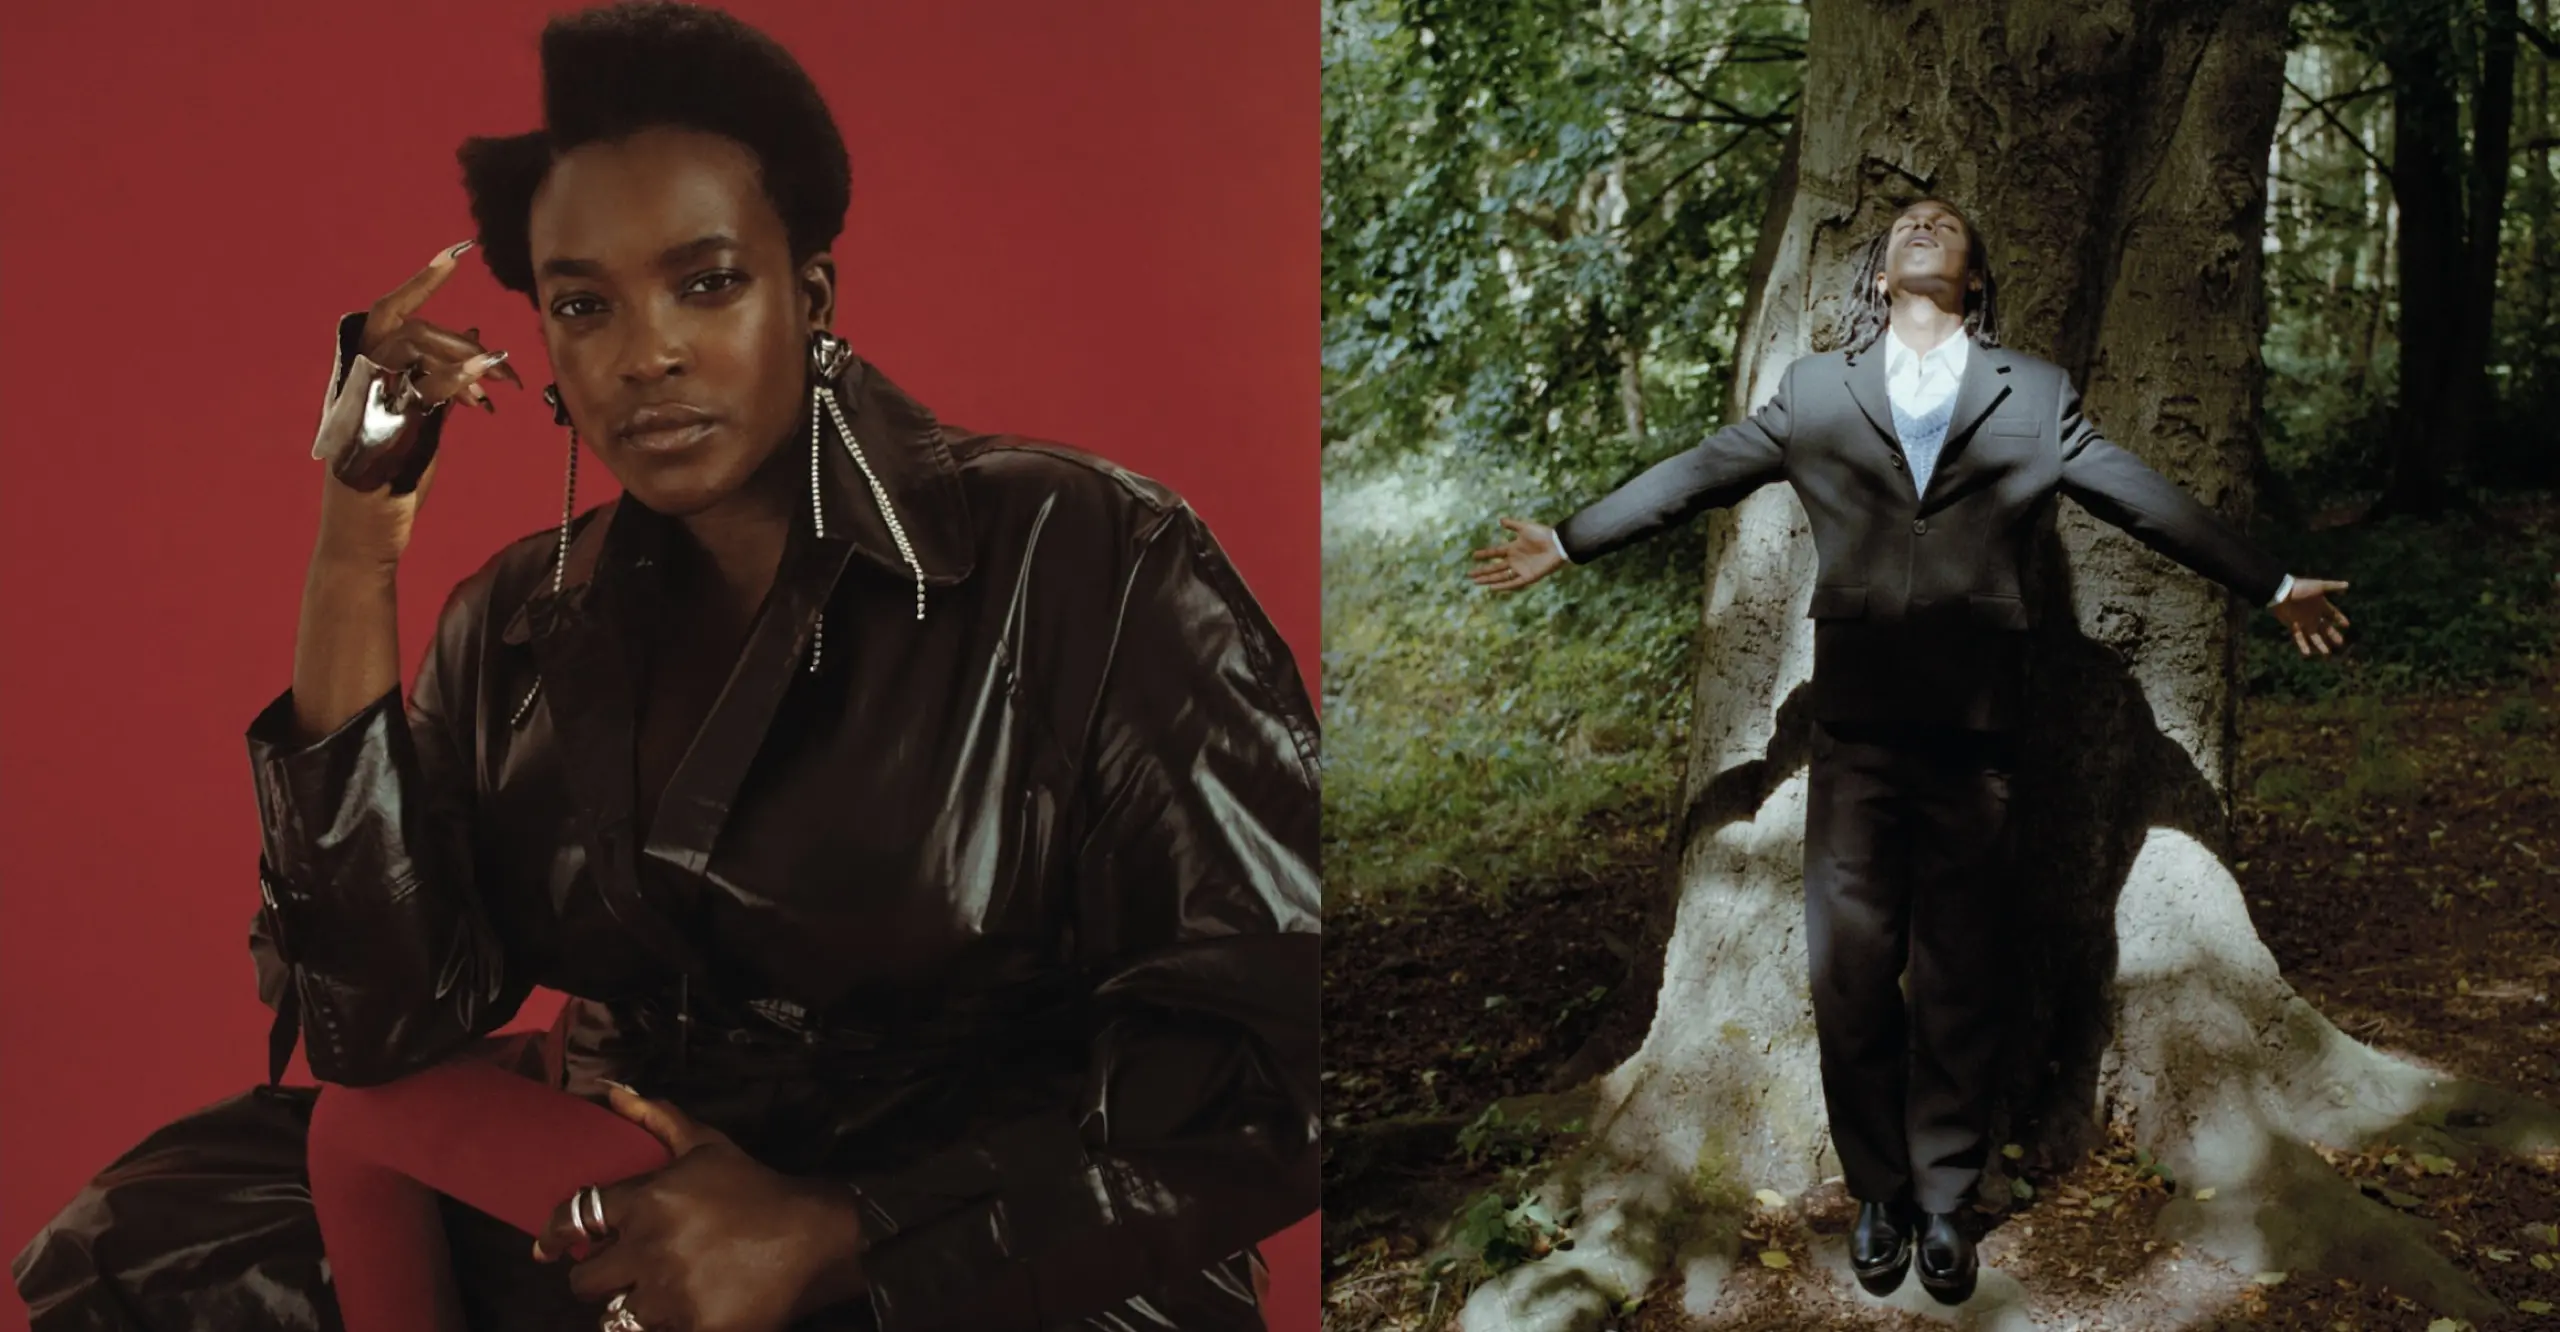 Two images: (1)  portrait with red background wearing a leather coat; (2) portrait of Bakar in suit in a forest